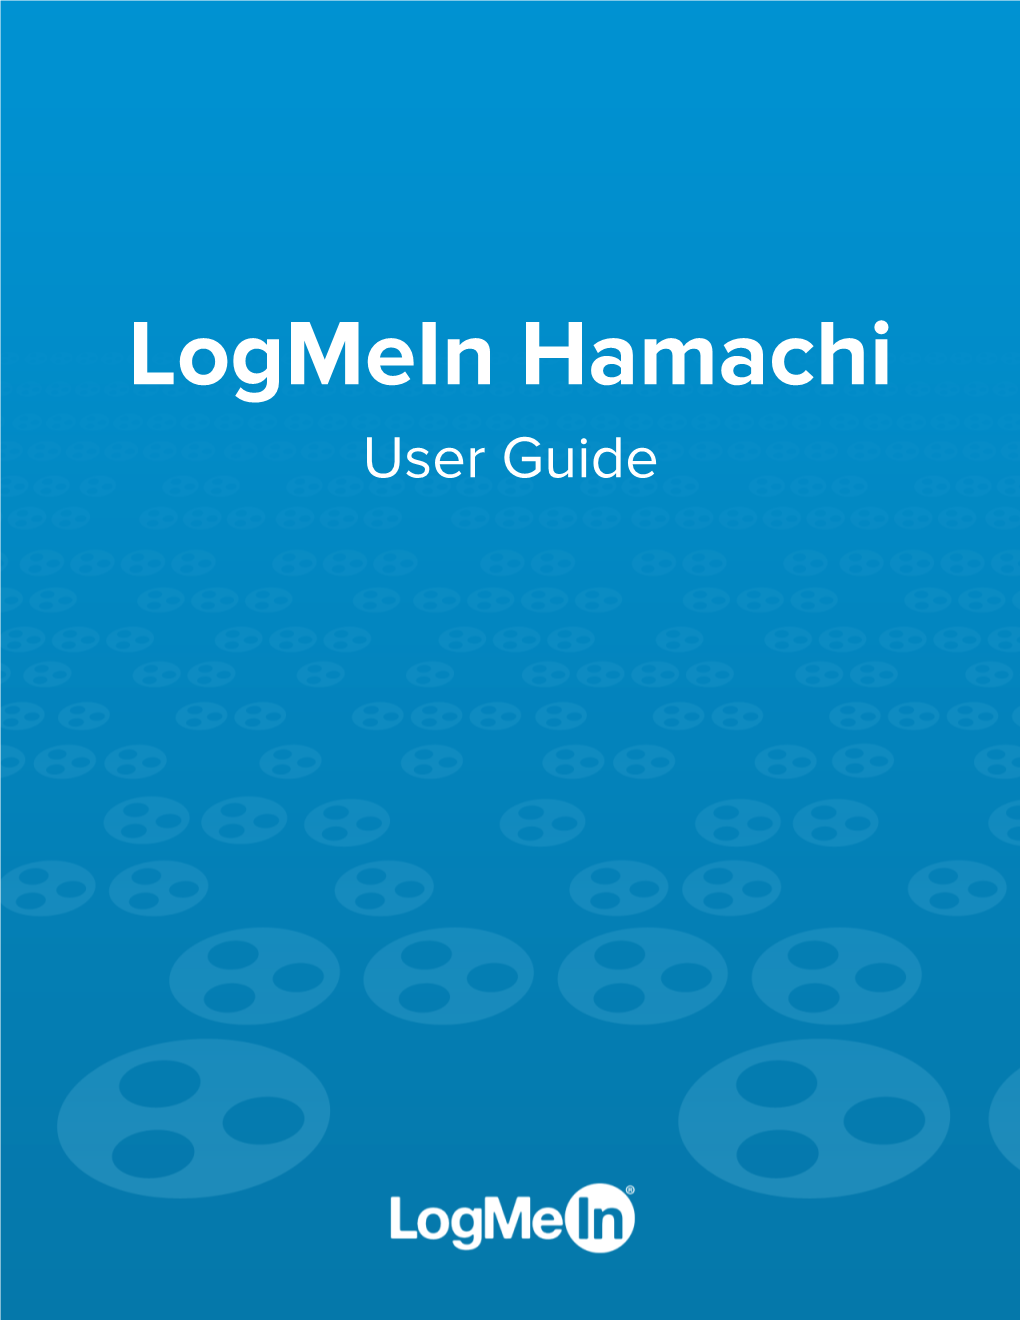 Logmein Hamachi User Guide Contents